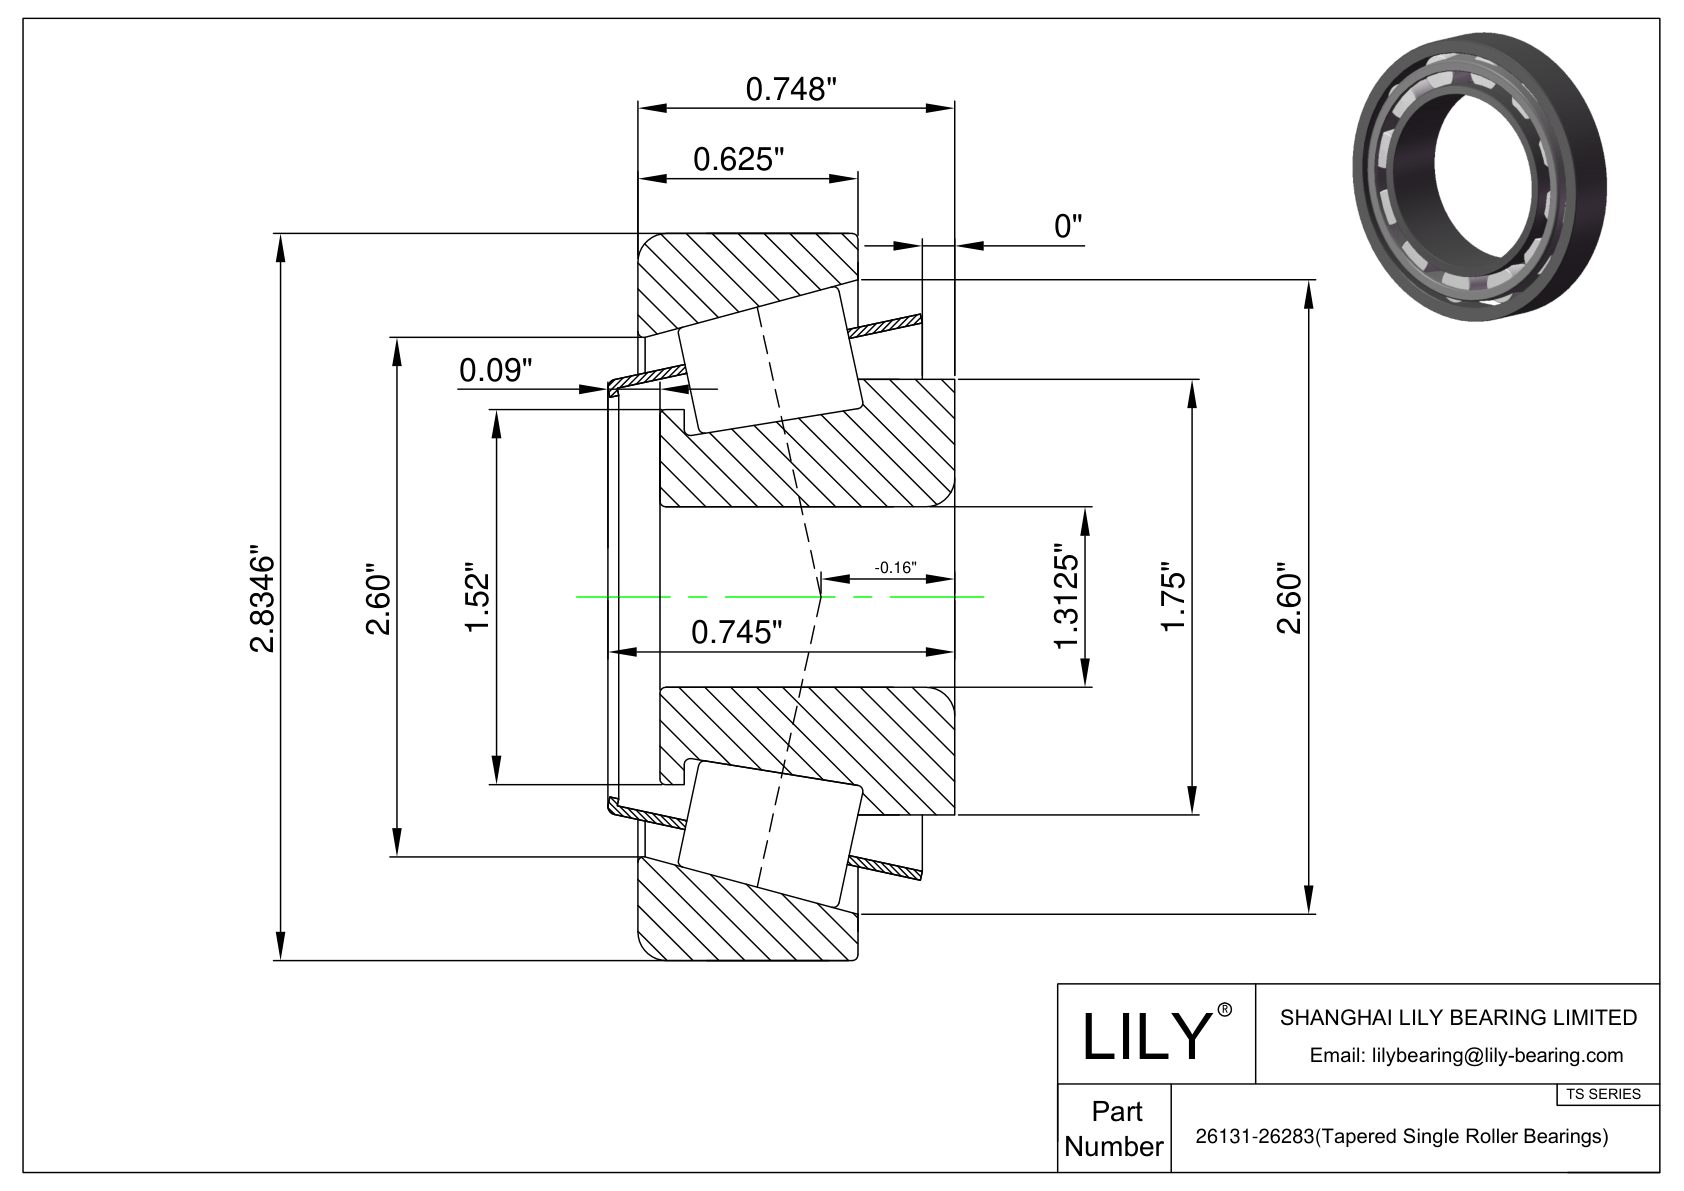 26131-26283 TS (Tapered Single Roller Bearings) (Imperial) cad drawing